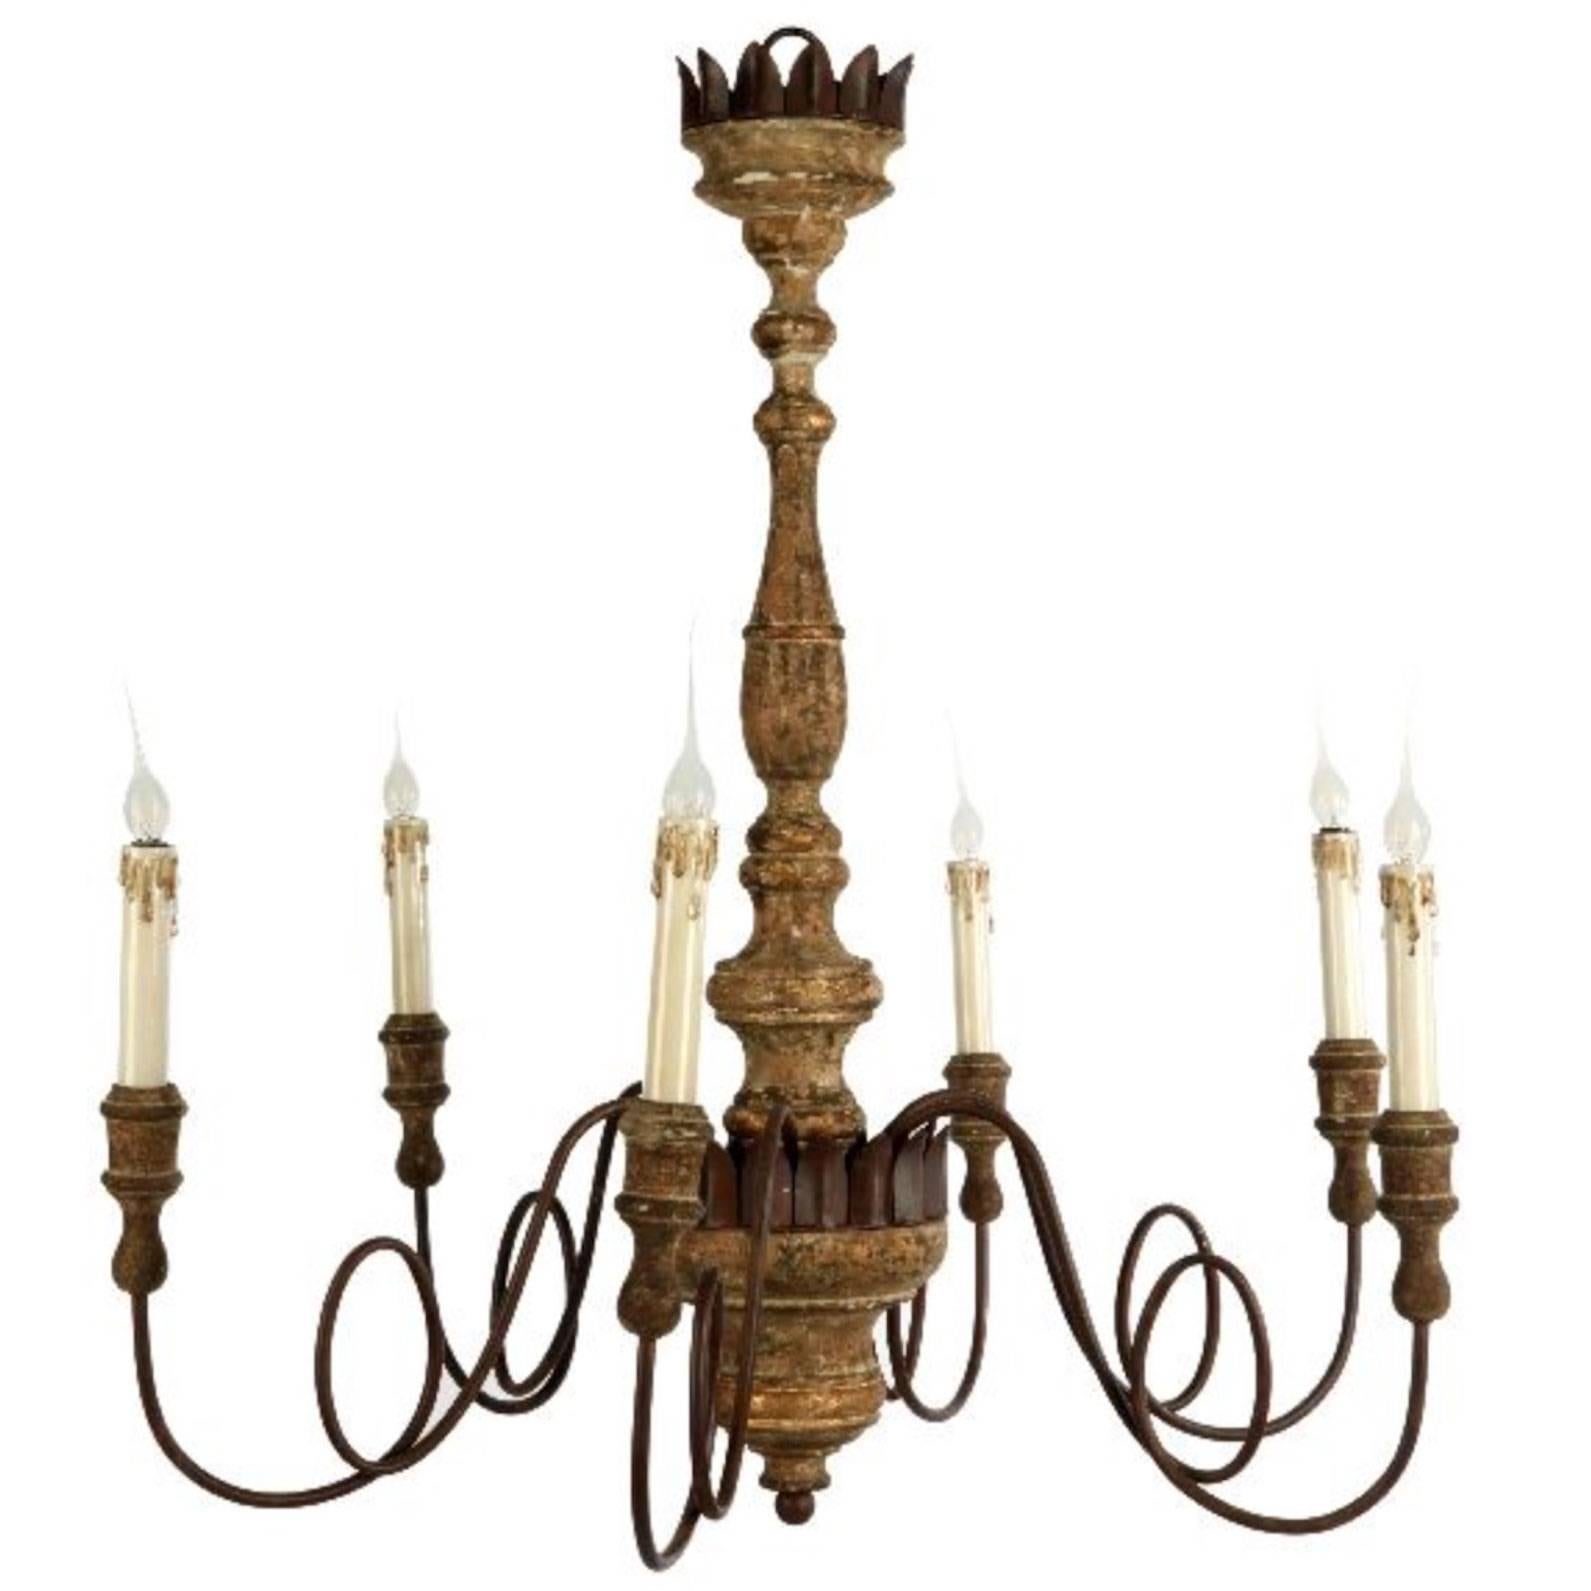 Set of Four Italian Style Carved Wood and Iron Chandeliers with Lovely Patina